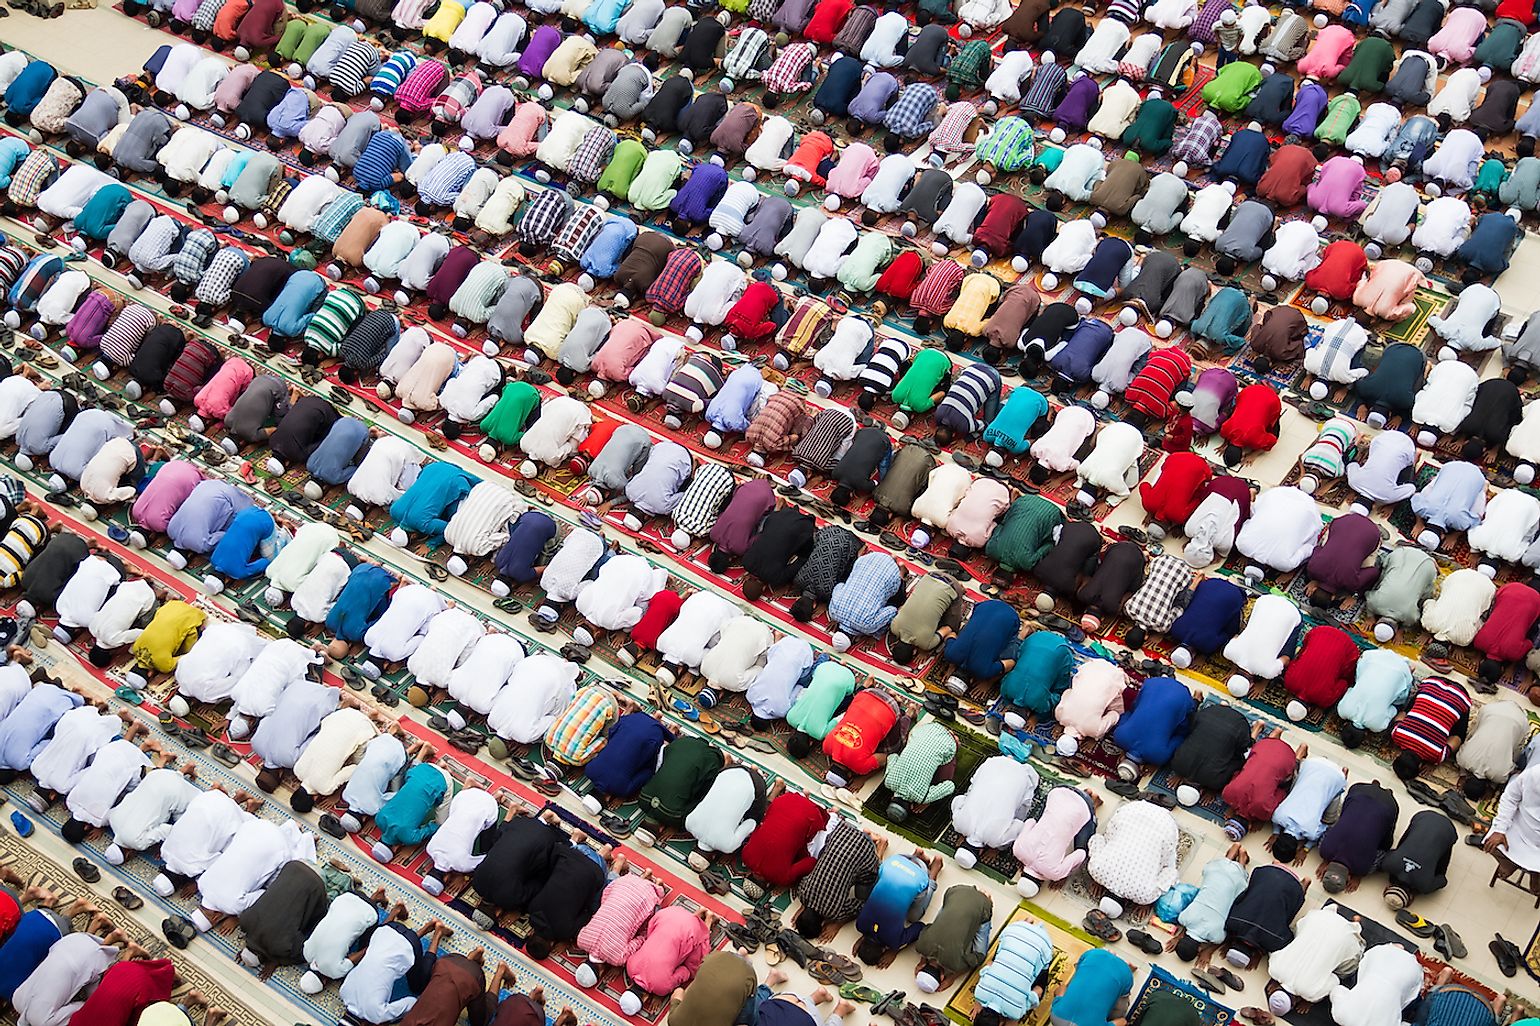 why islam is the fastest growing religion in the world